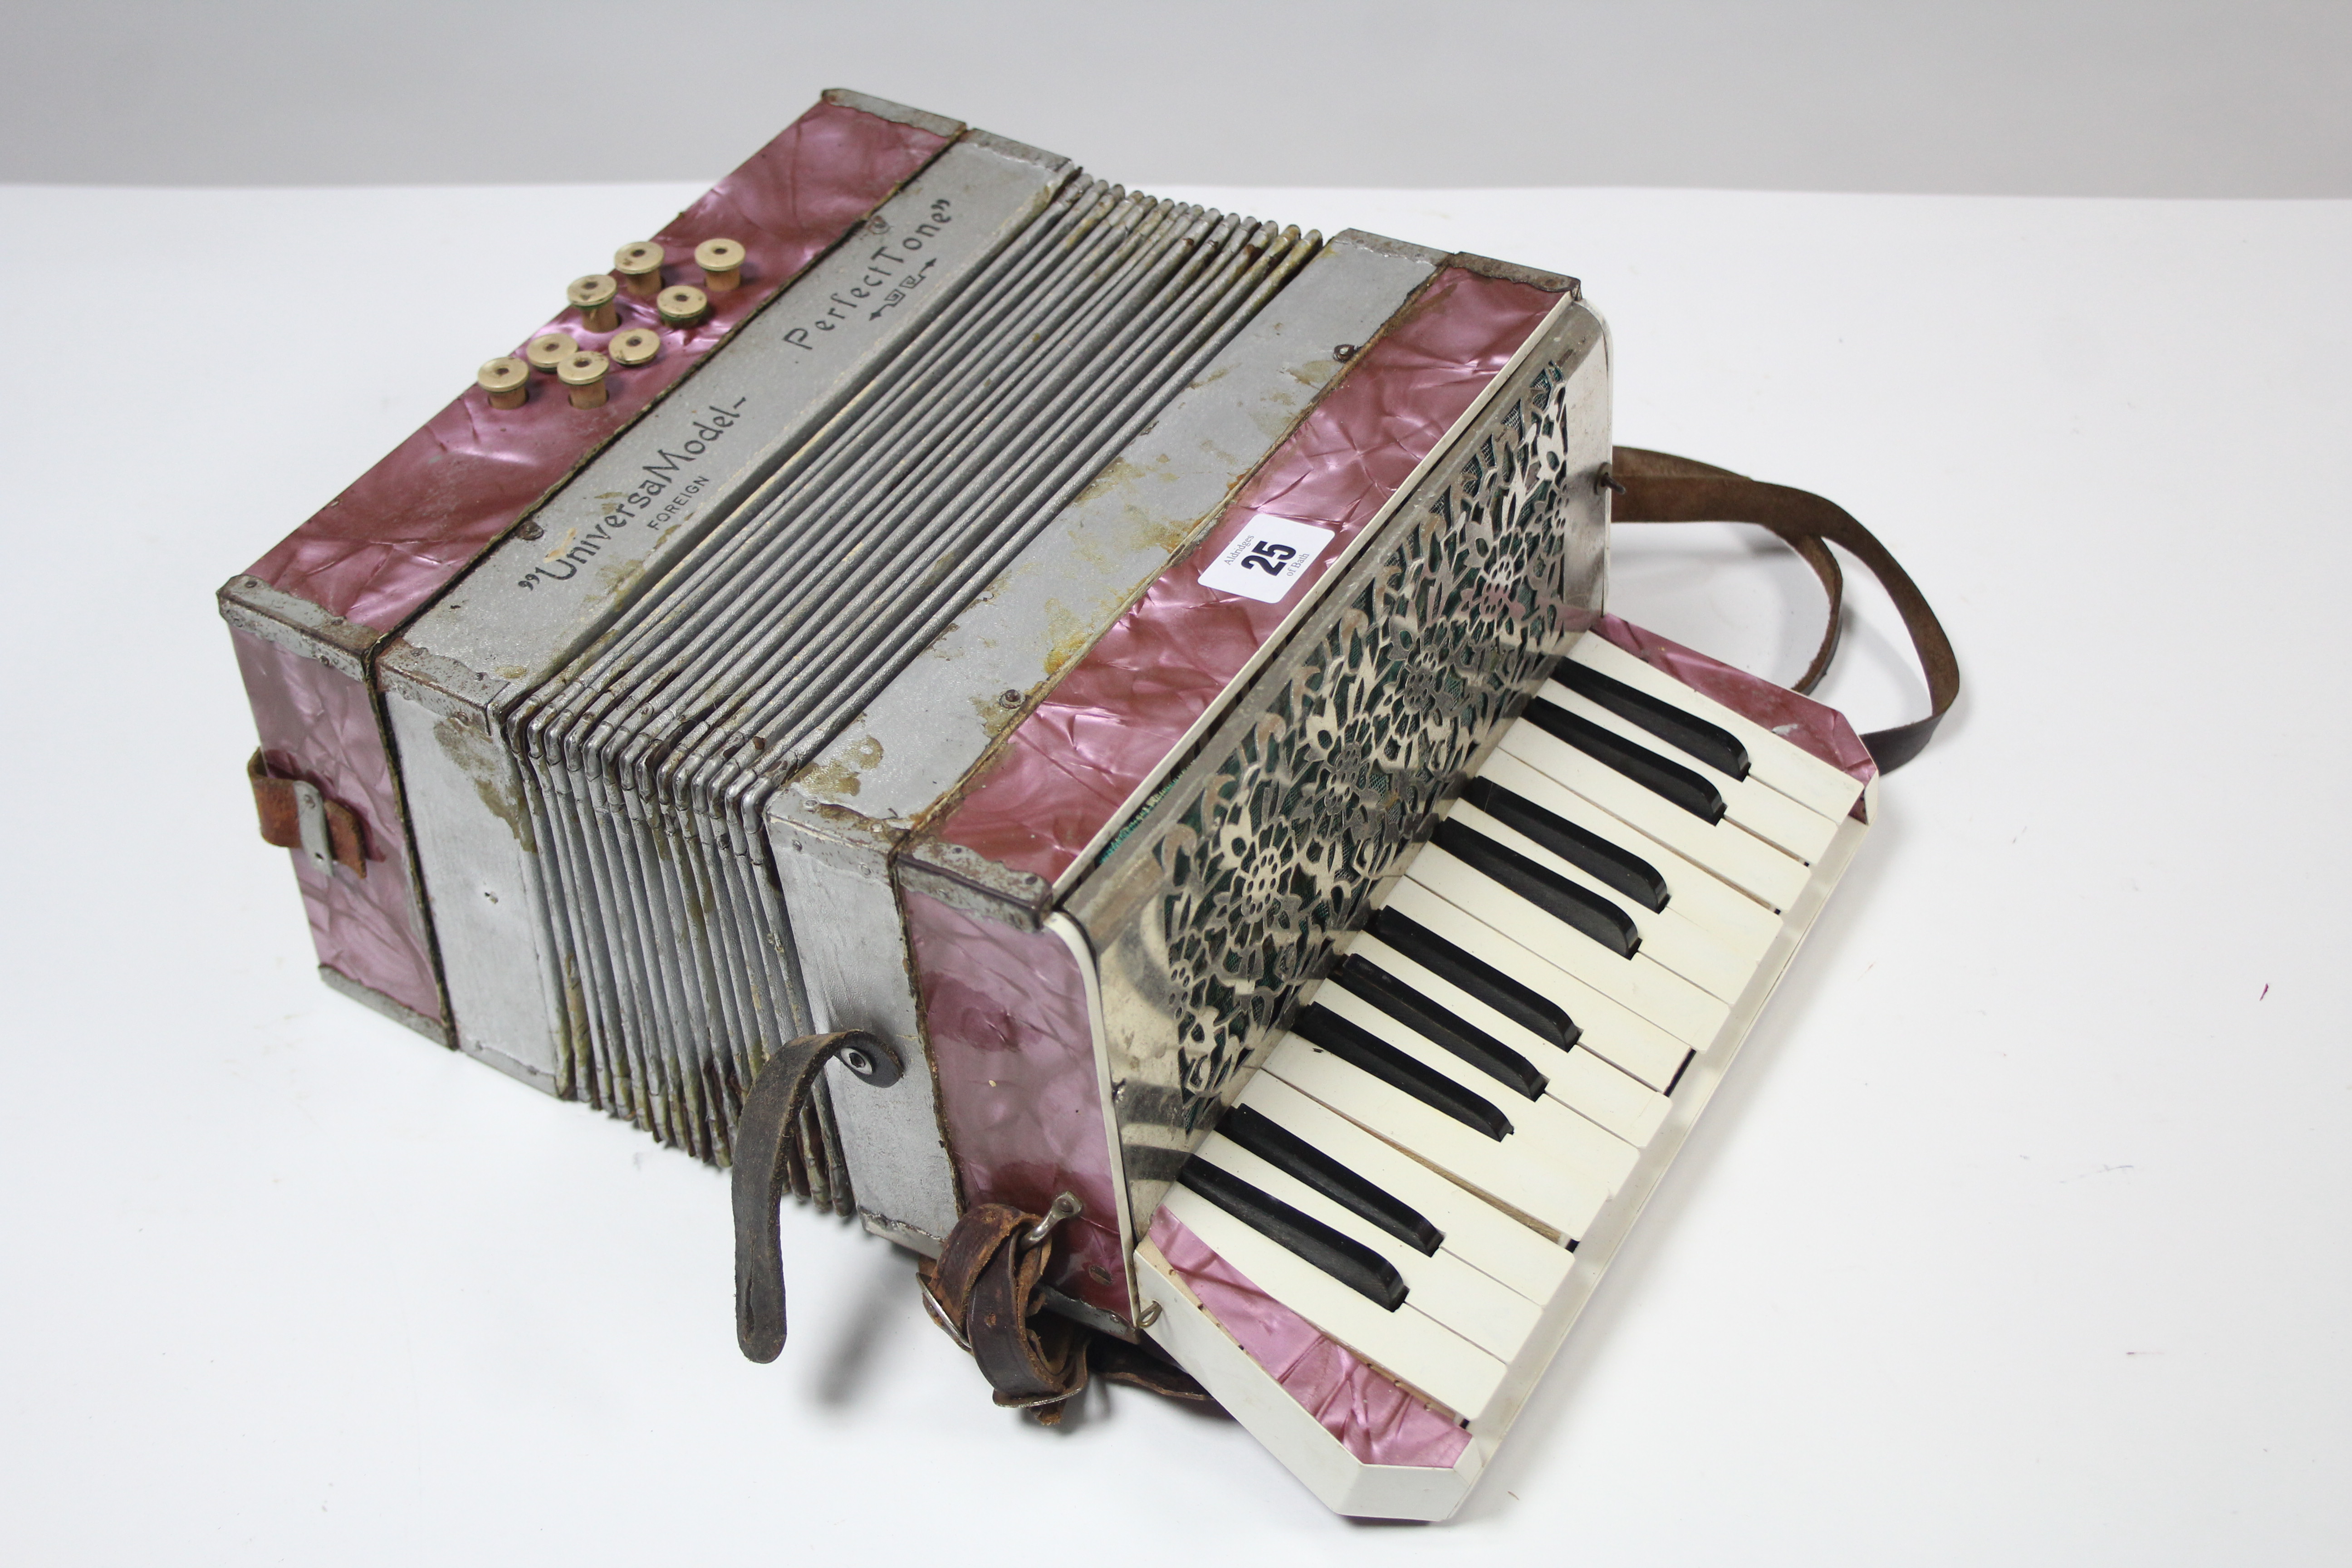 A "Universa" model Perfect Tone piano accordion, with carrying case. - Image 2 of 2